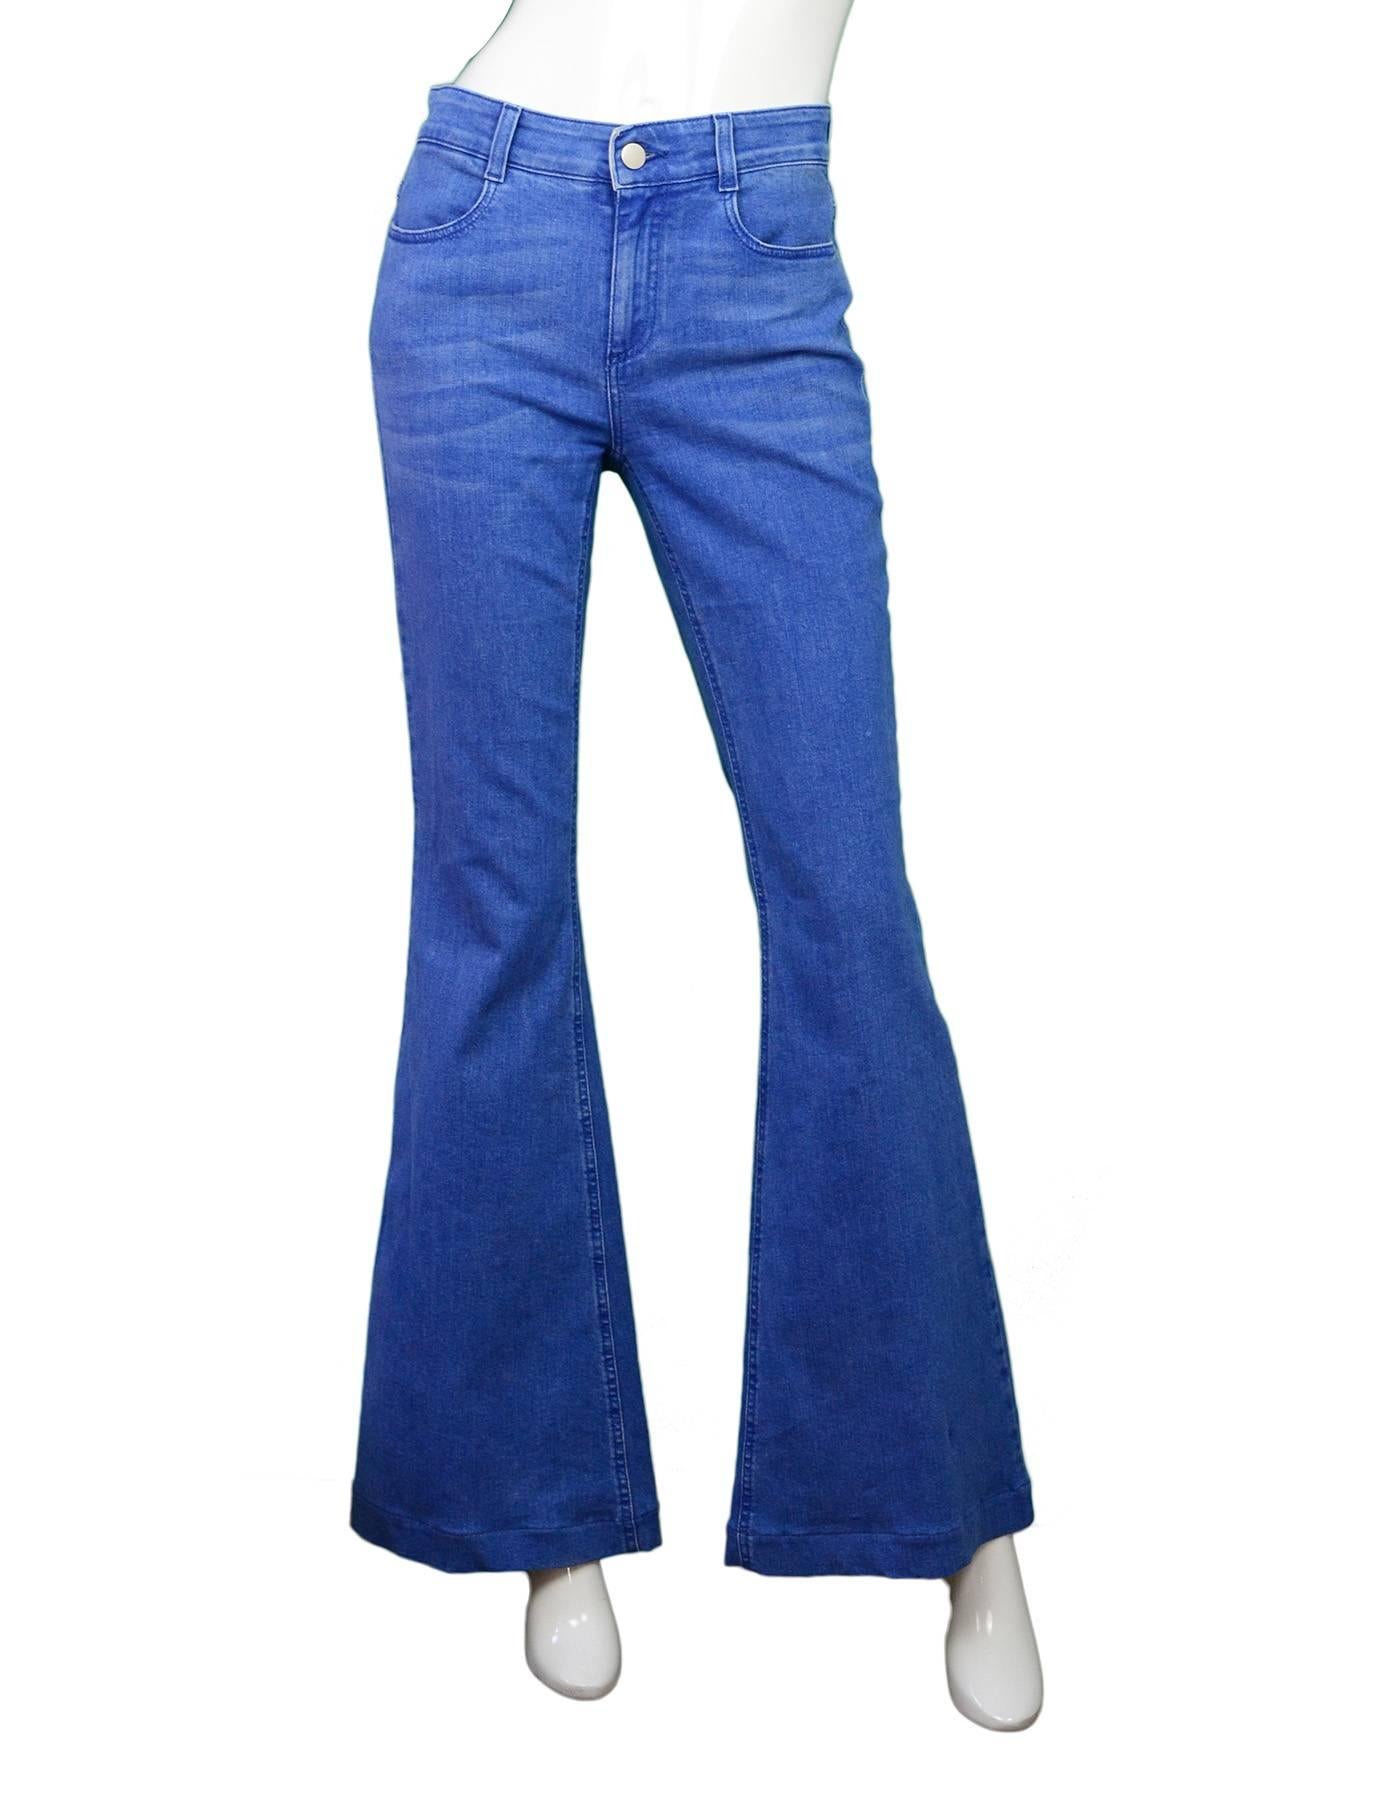 Stella McCartney Blue Flare Jeans Sz 29 

Made In: Italy
Color: Blue
Composition: 98% cotton, 2% elastane
Lining: None
Closure/Opening: Button and zip up
Exterior Pockets: Two hip pockets and two back pockets
Interior Pockets: None
Retail Price: